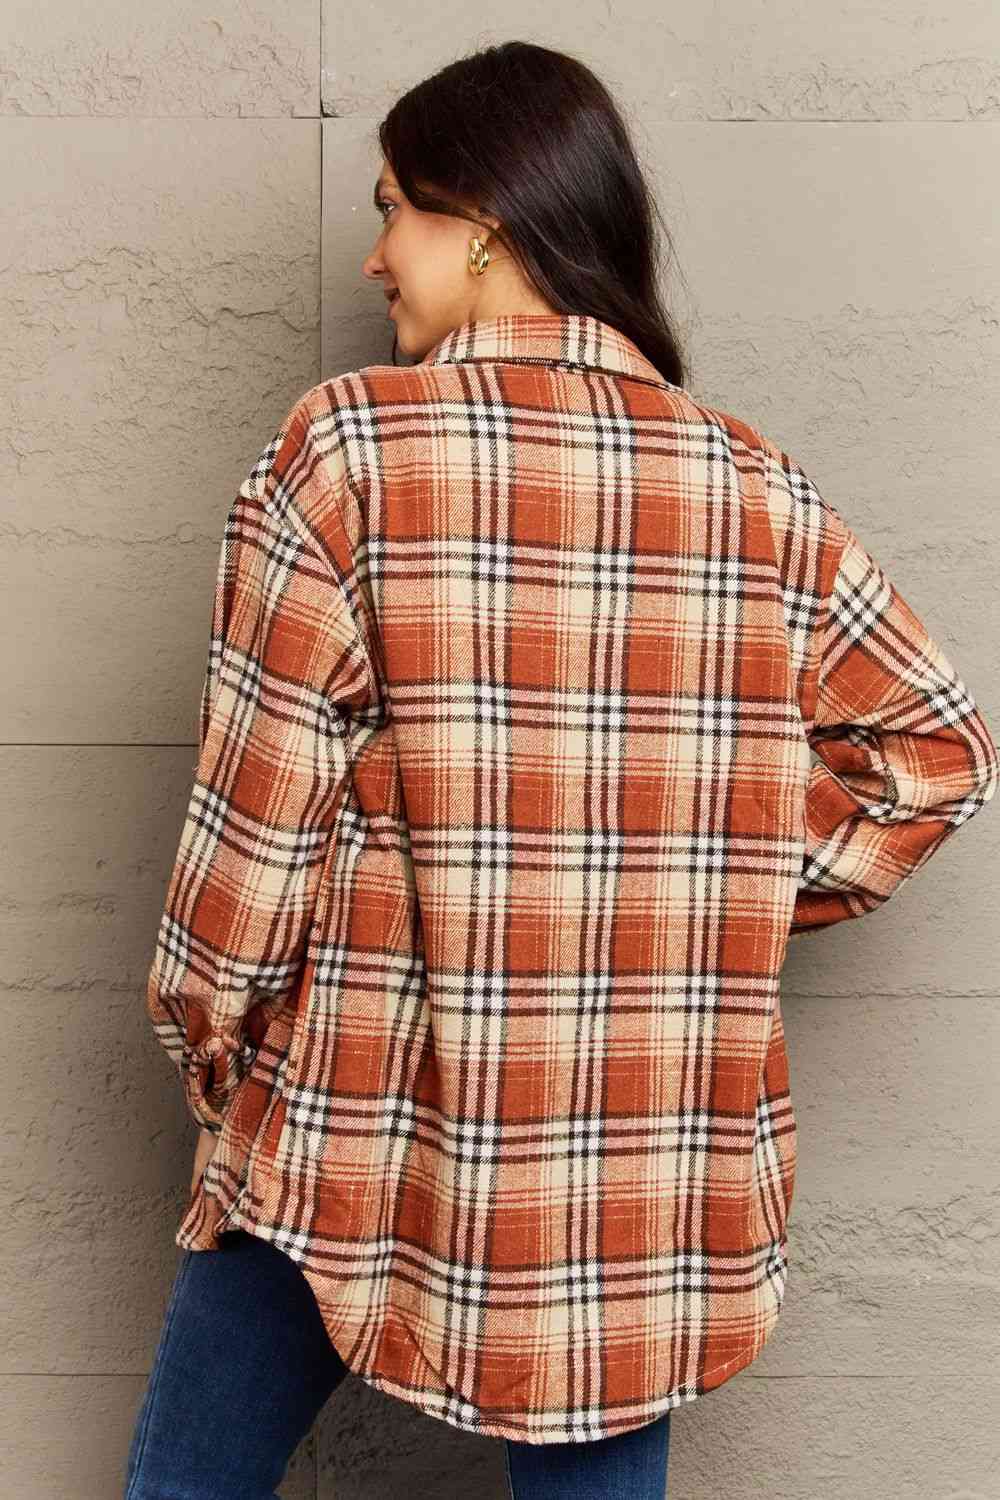 Ninexis Full Size Plaid Collared Neck Button-Down Long Sleeve Jacket - Carbone's Marketplace